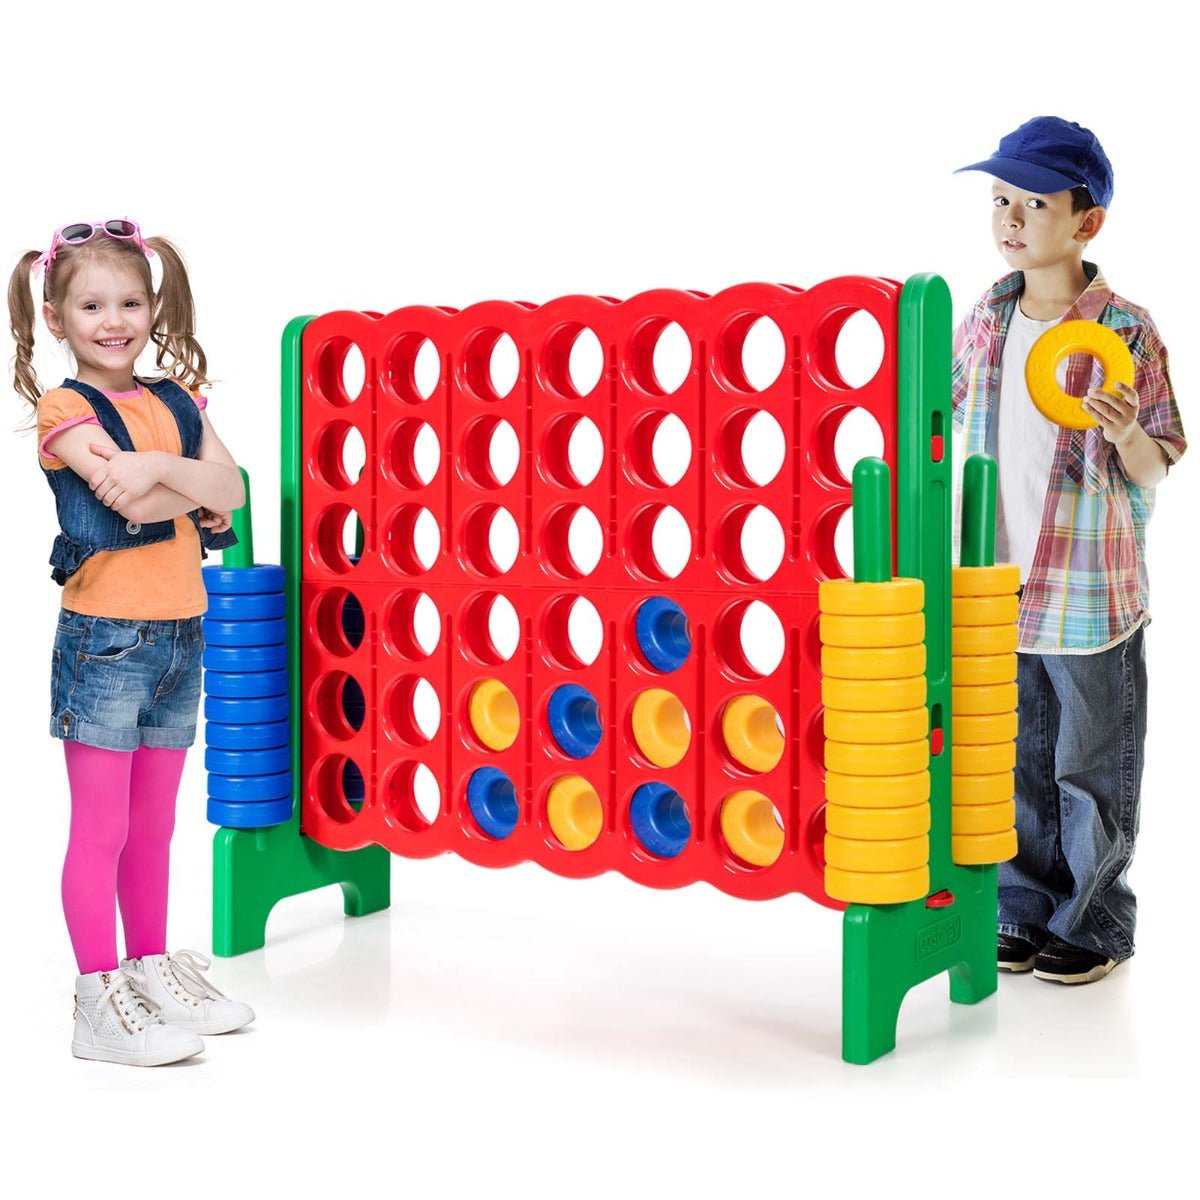 Giant Connect 4 in A Row Set - 42 Jumbo Rings for Exciting Outdoor Play